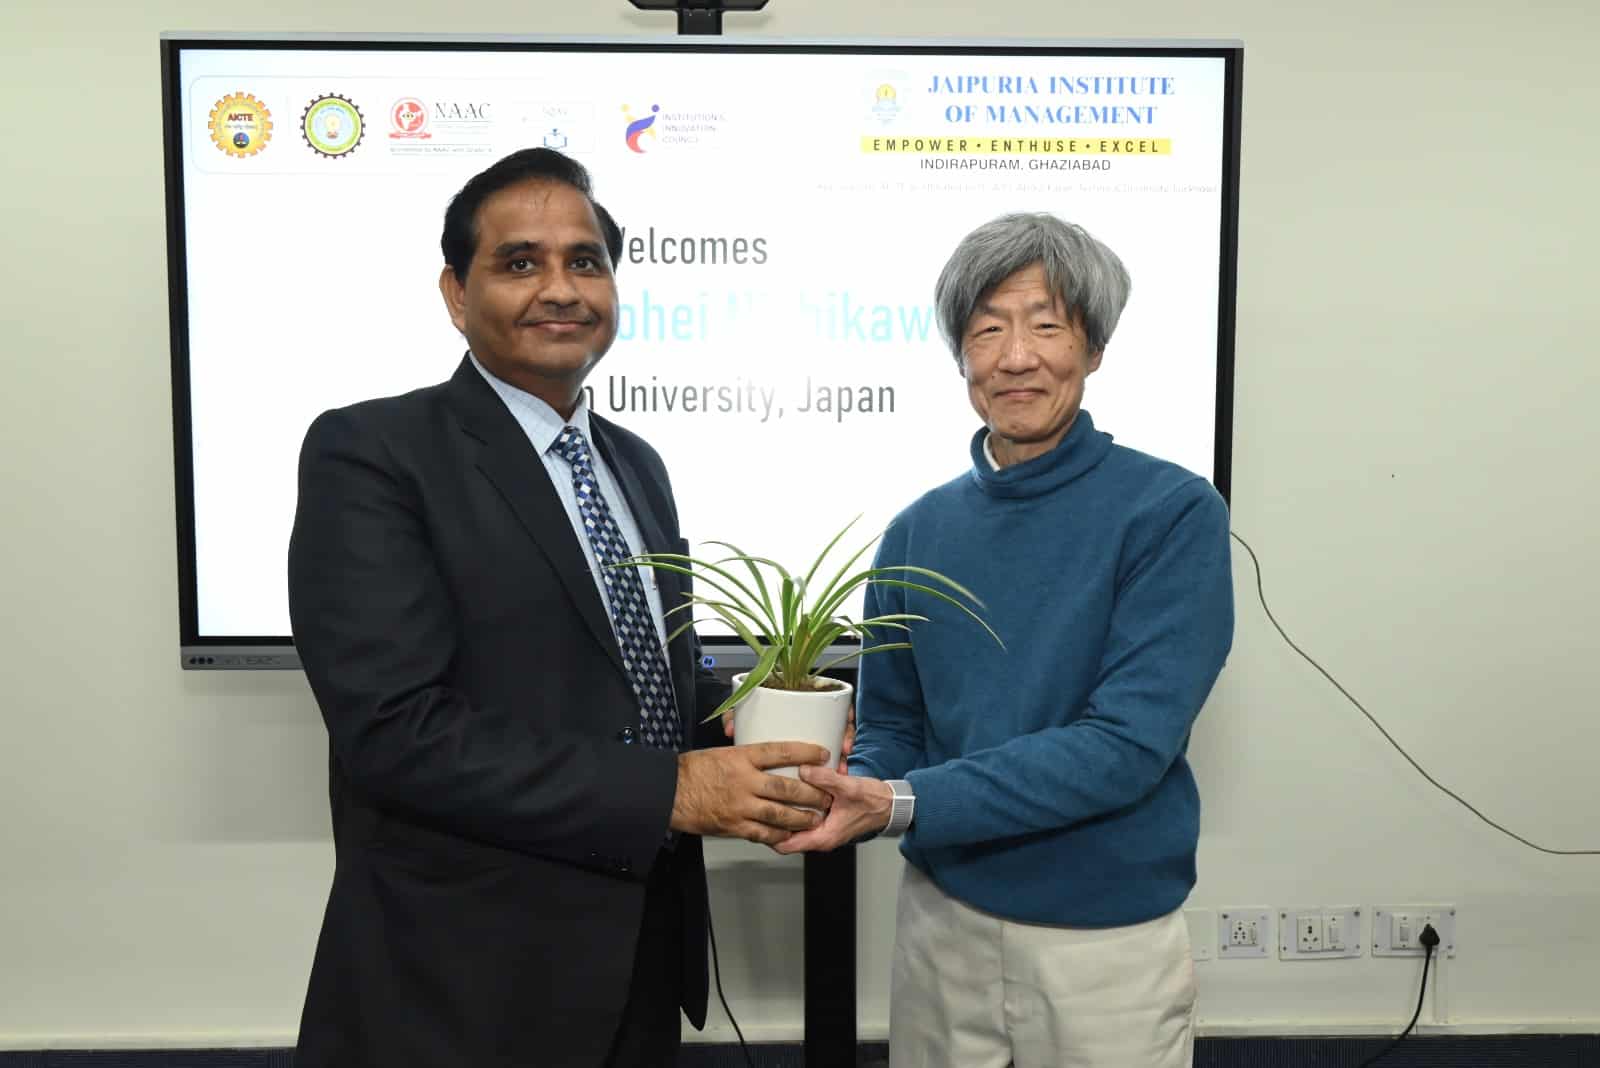 Prof. Kohei Nishikawa from Konan University being welcomed with a traditional plant gift by Prof. Dr Daviender Naraang at Jaipuria Institute of Management.